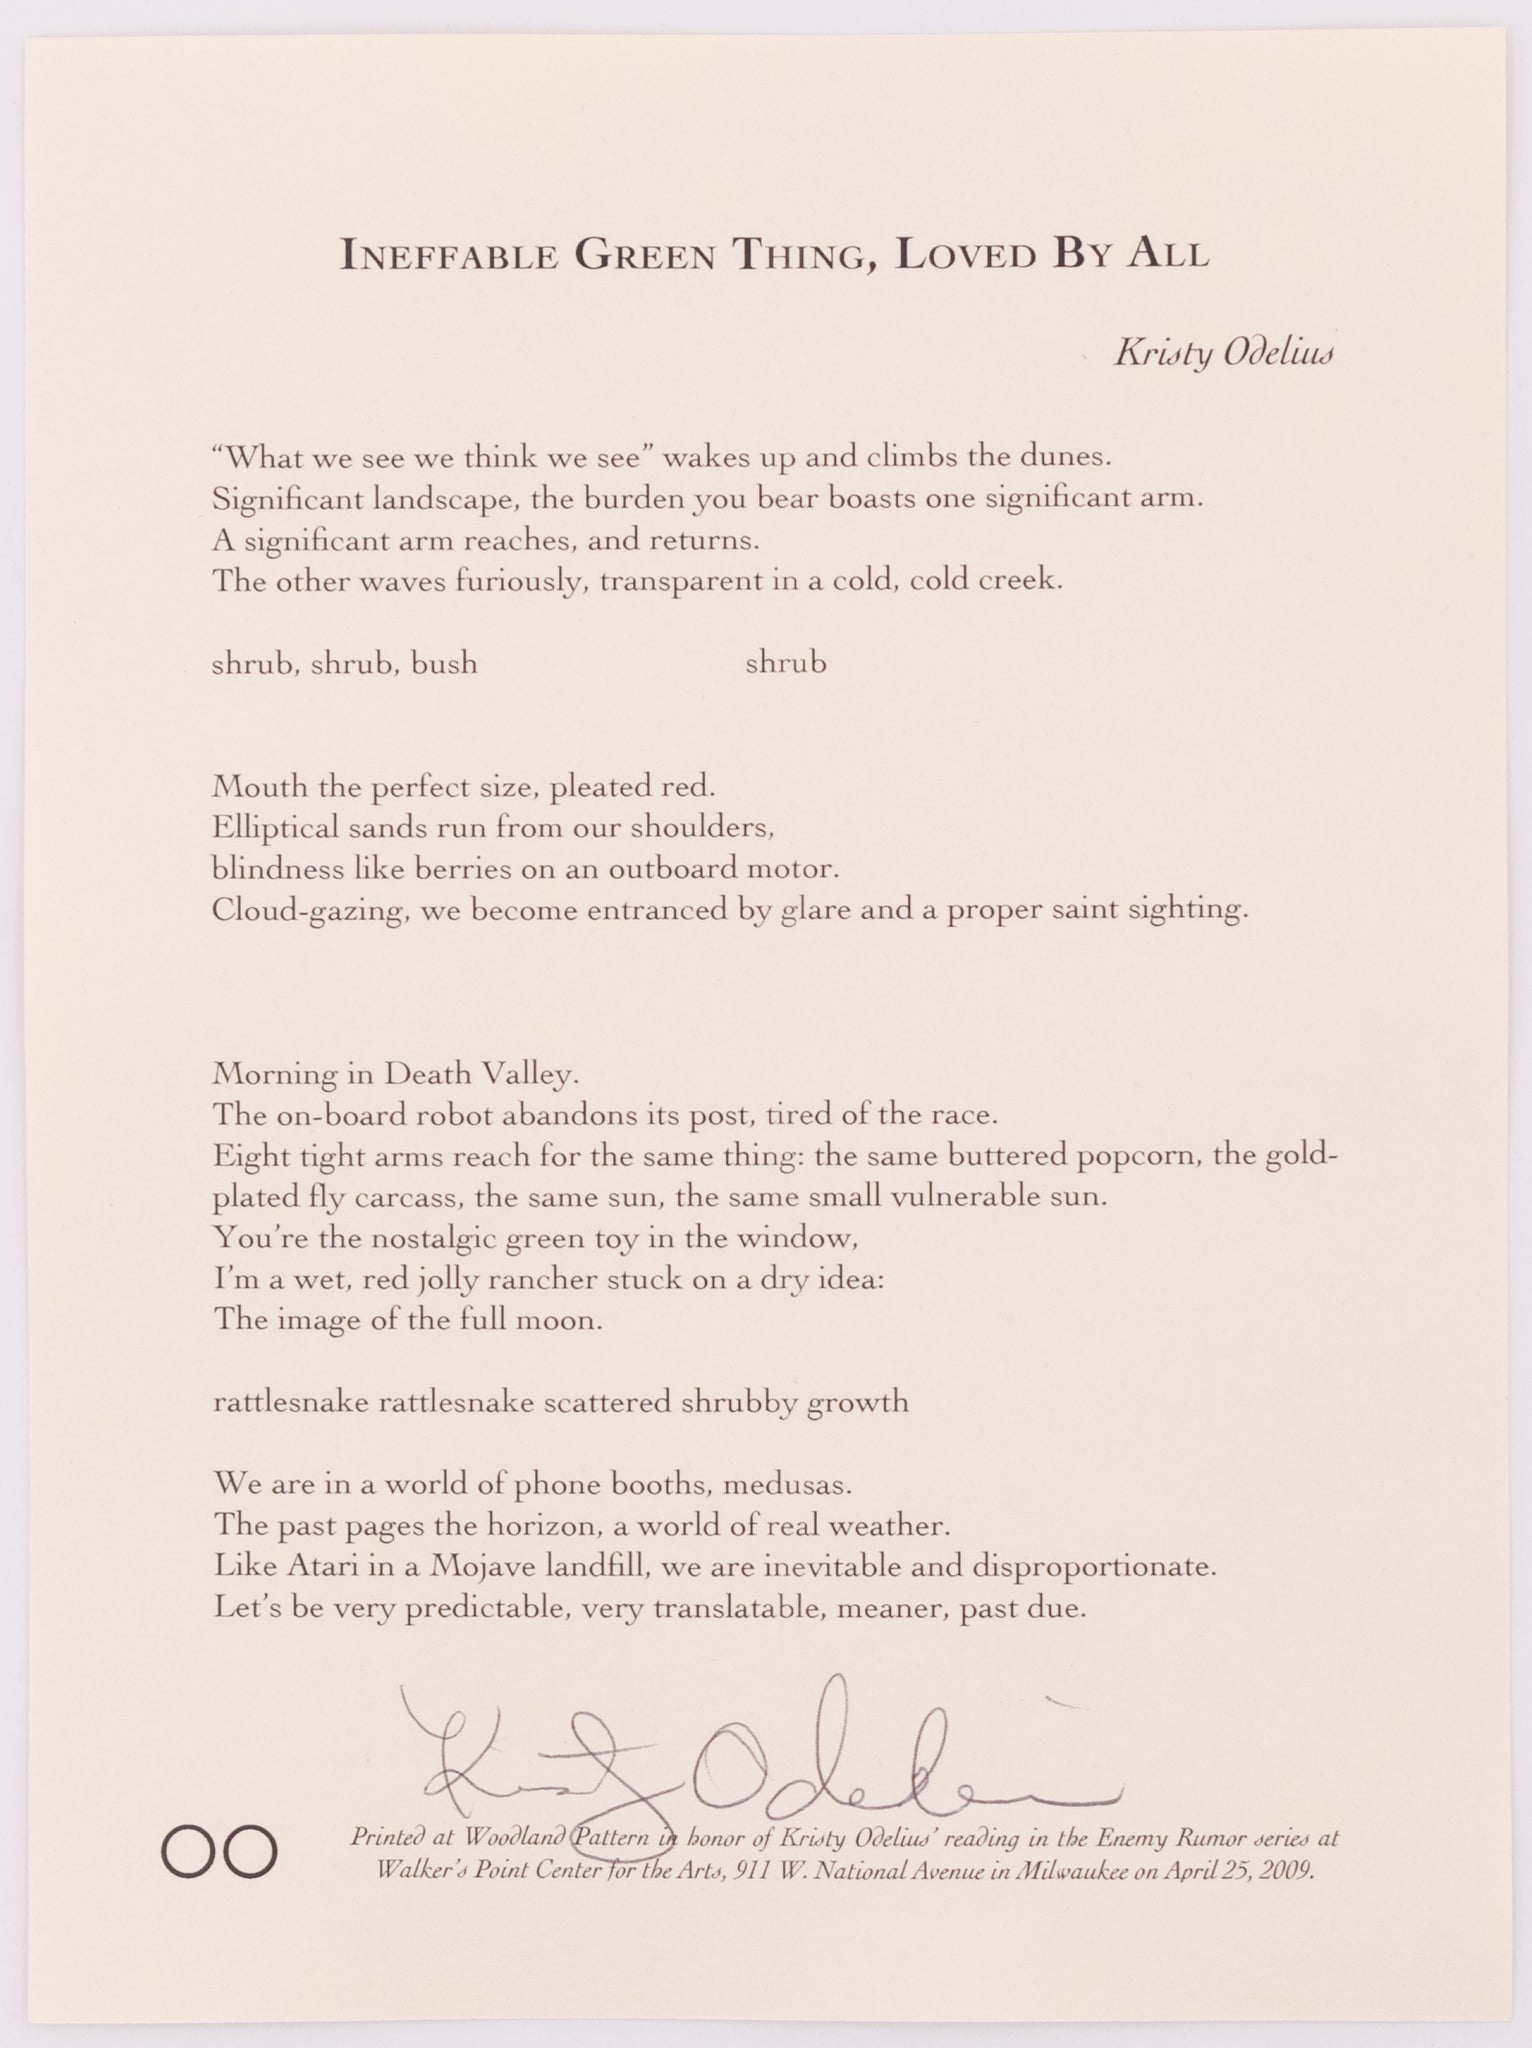 Broadside titled Ineffable Green Thing, loved by all by Kristy Odelius. Black text on grey paper